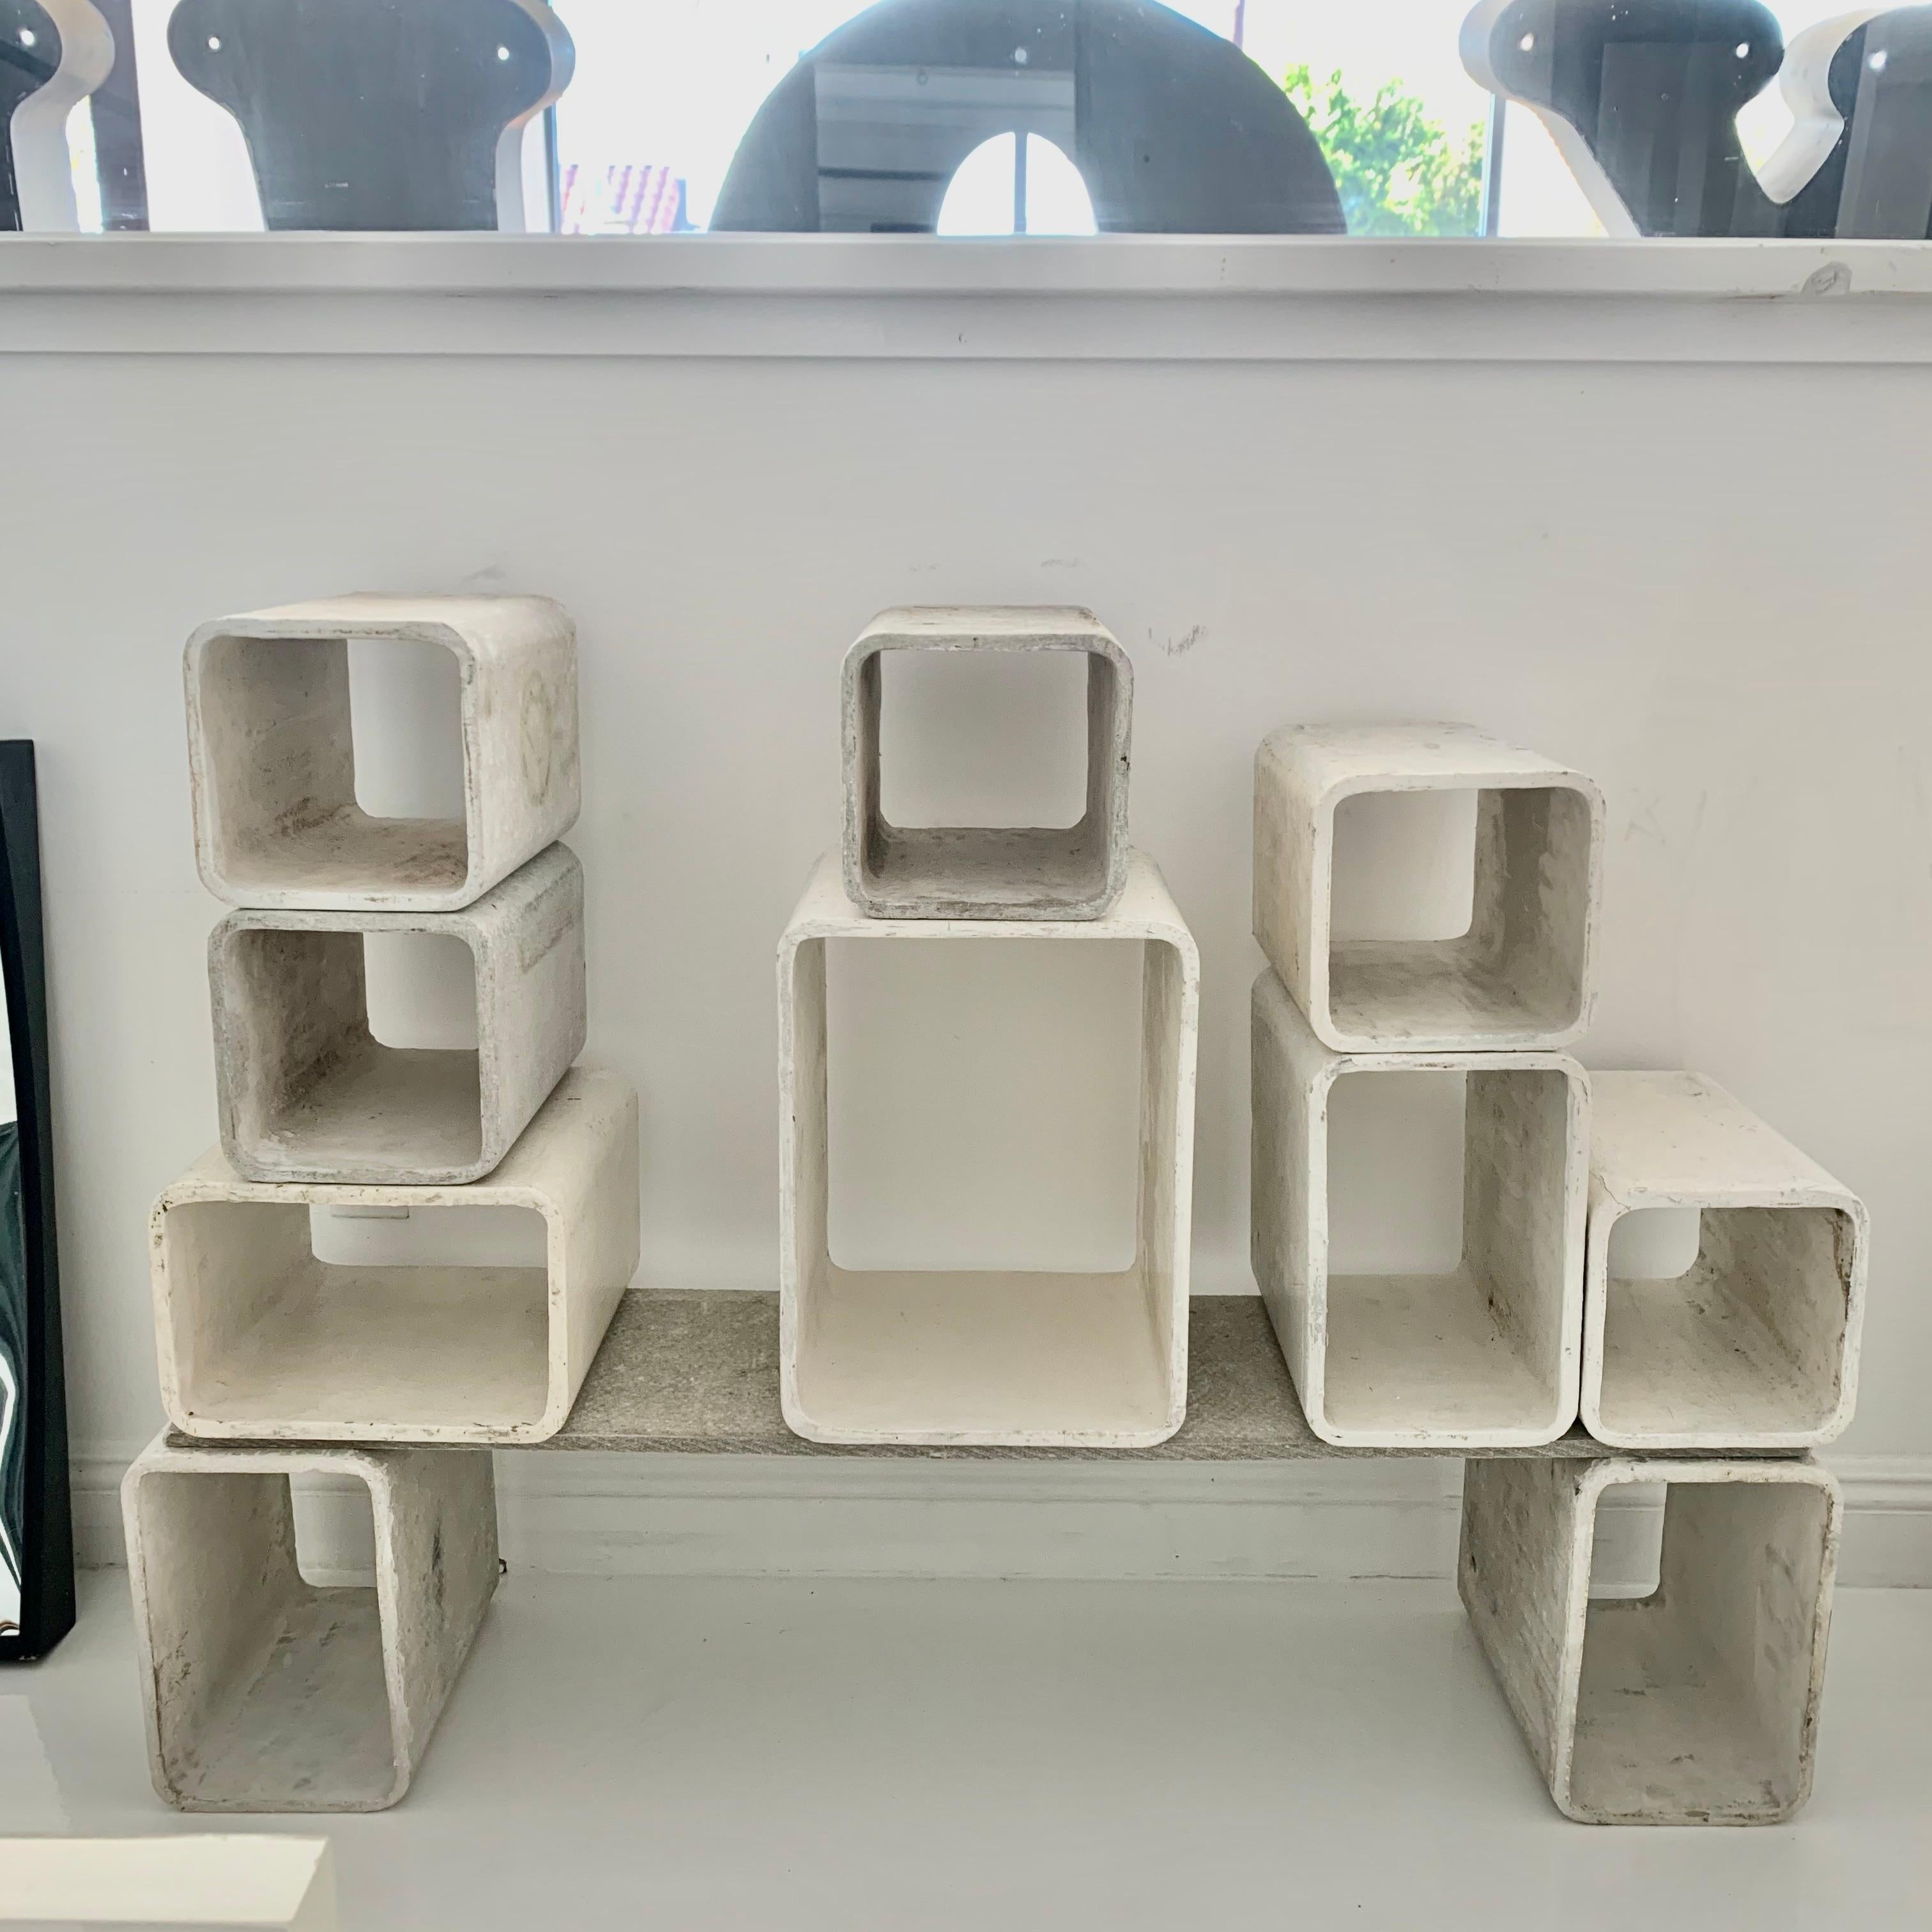 Sculptural concrete bookcase by Swiss architect Willy Guhl. Handmade in Switzerland in the early 1960s. Produced by Eternit. Set consists of 10 concrete cubes and one concrete shelf. Cubes can be arranged in various ways. Great display